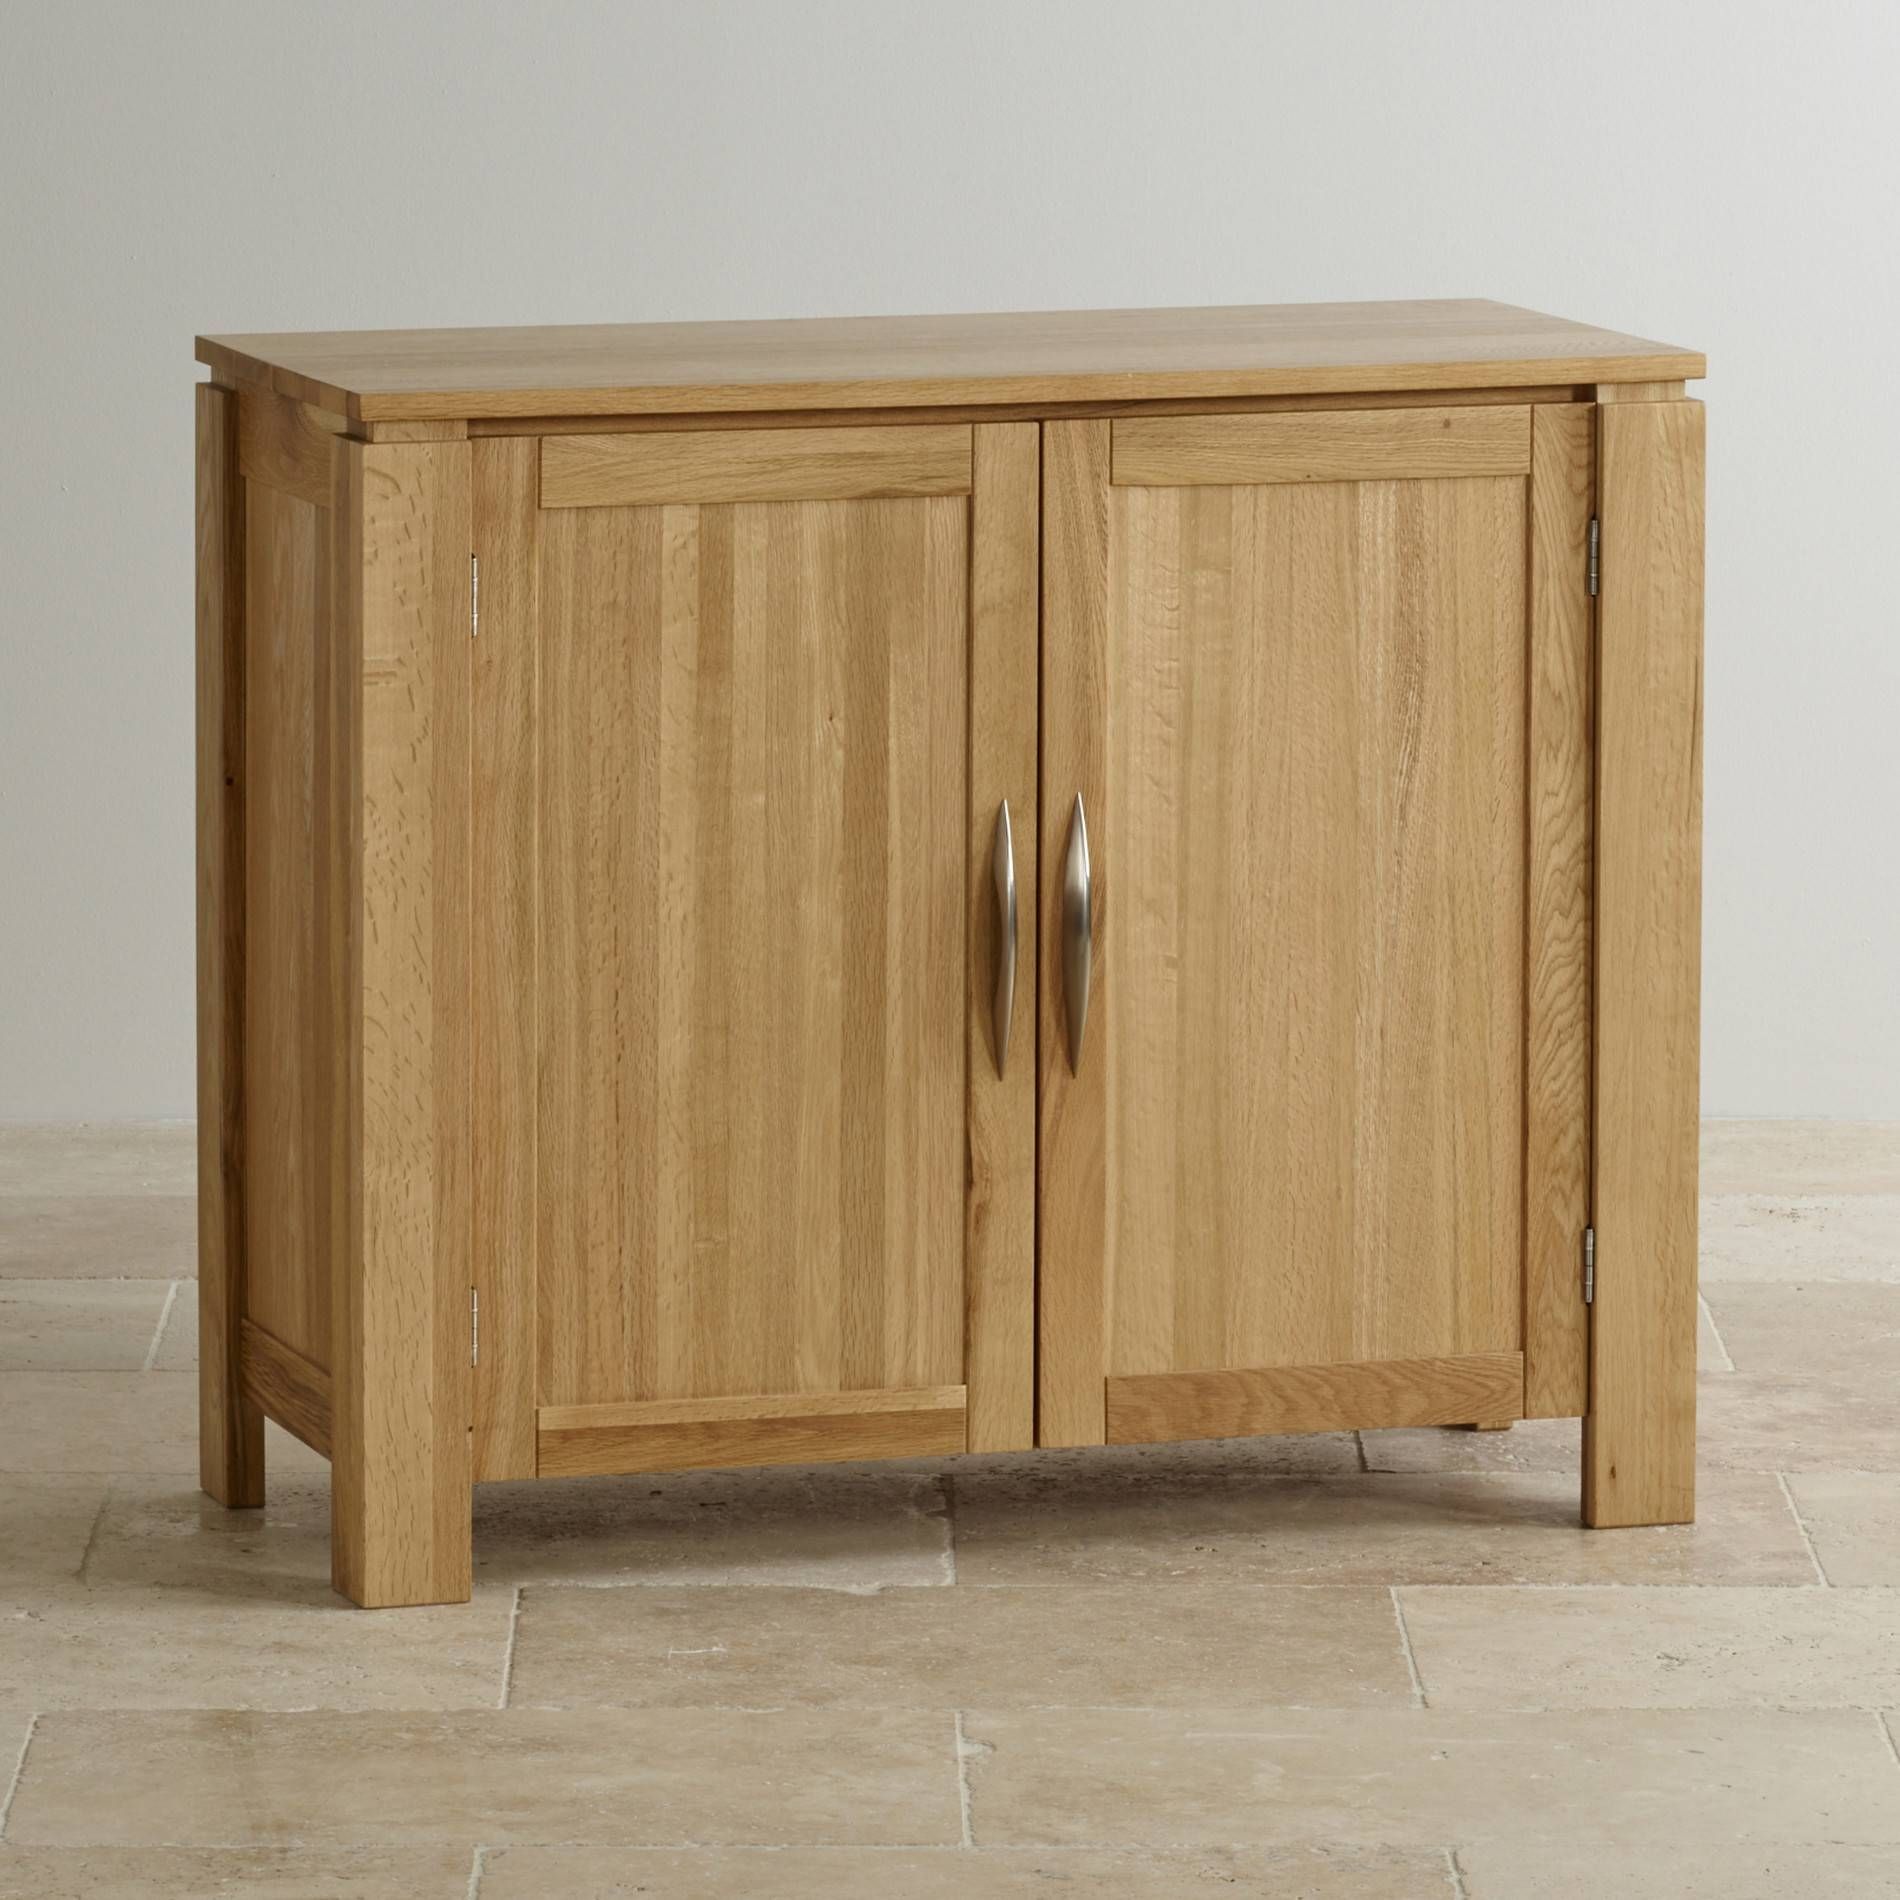 Galway Small Sideboard In Natural Solid Oak | Oak Furniture Land Throughout Narrow Oak Sideboards (View 2 of 15)